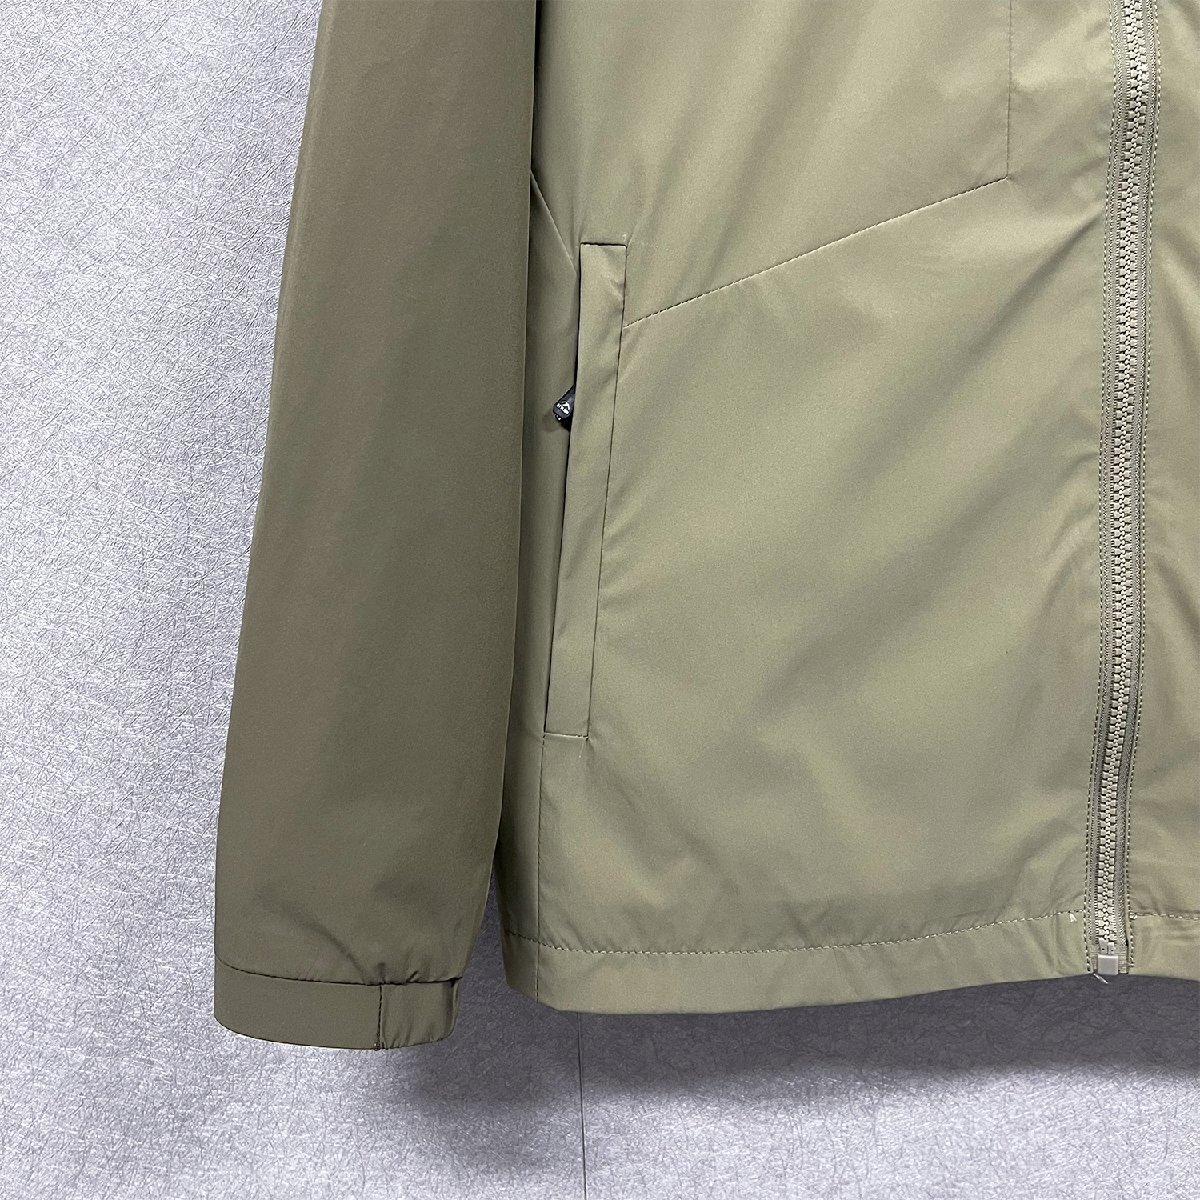  standard * jacket regular price 6 ten thousand *Emmauela* Italy * milano departure * on shortage of stock hand . manner piece . switch sport outer casual mountaineering . fishing XL/50